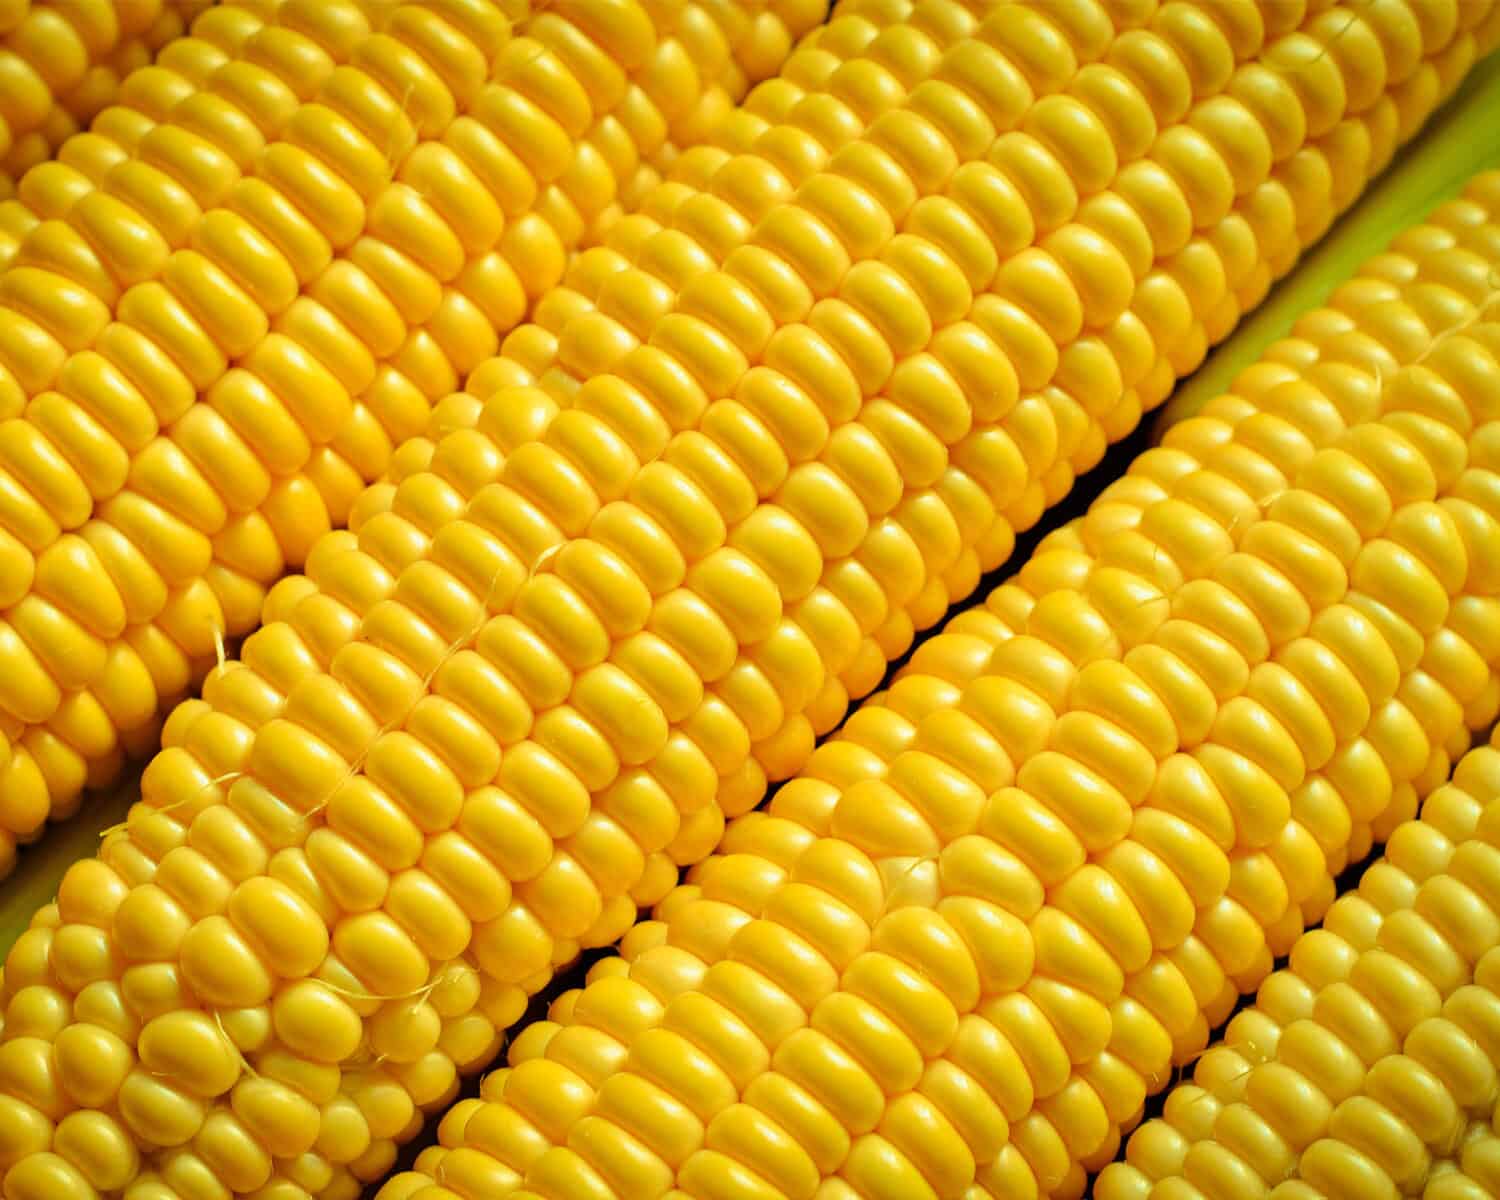 summer corn cobs fill the frame of a photo.
